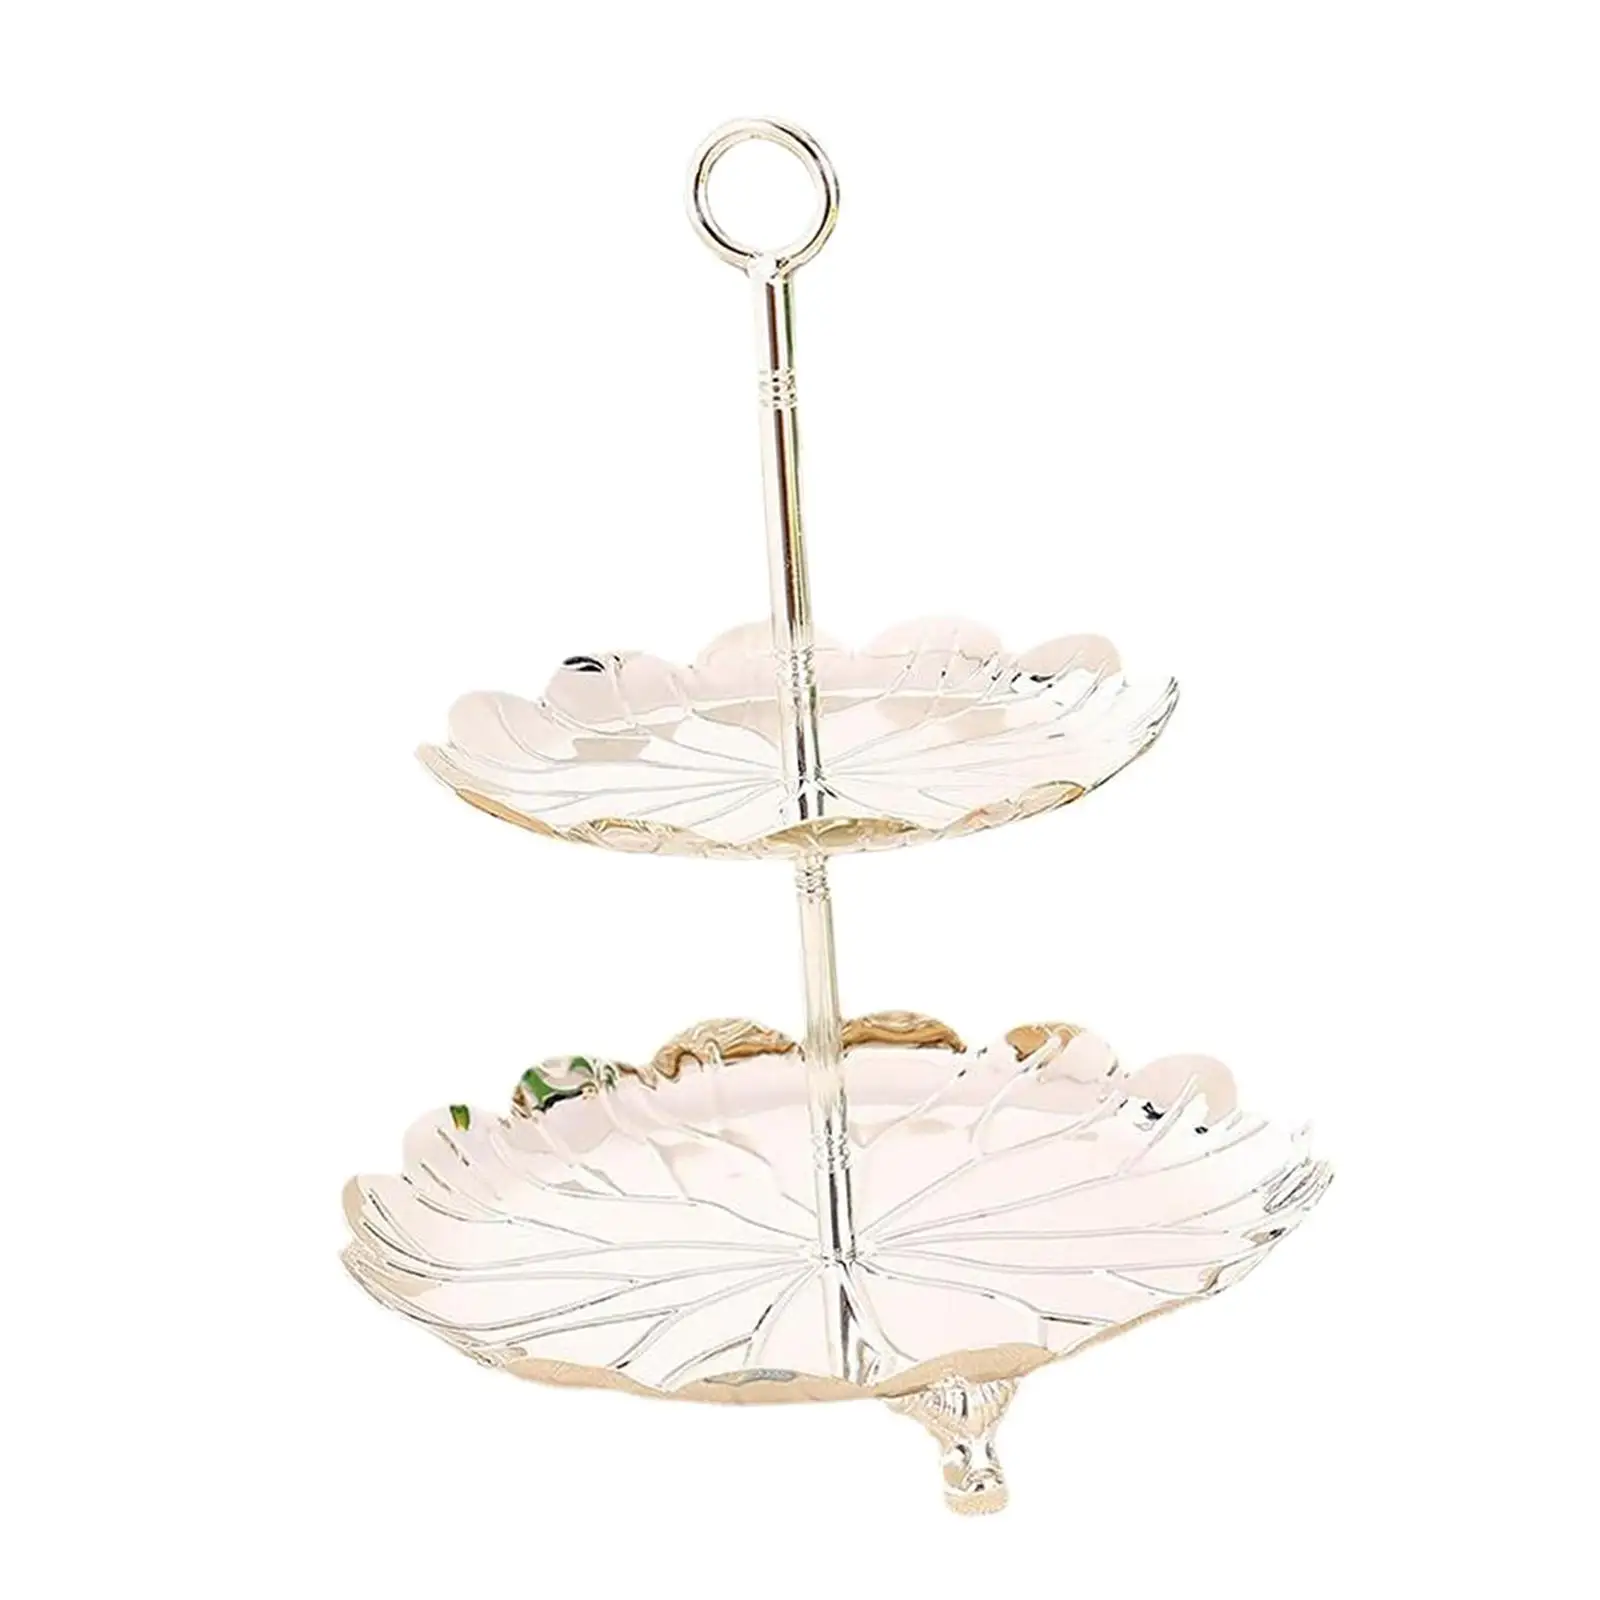 2 Tiered Cake Stand Cupcake Stand Elegant and Luxury for Afternoon Tea